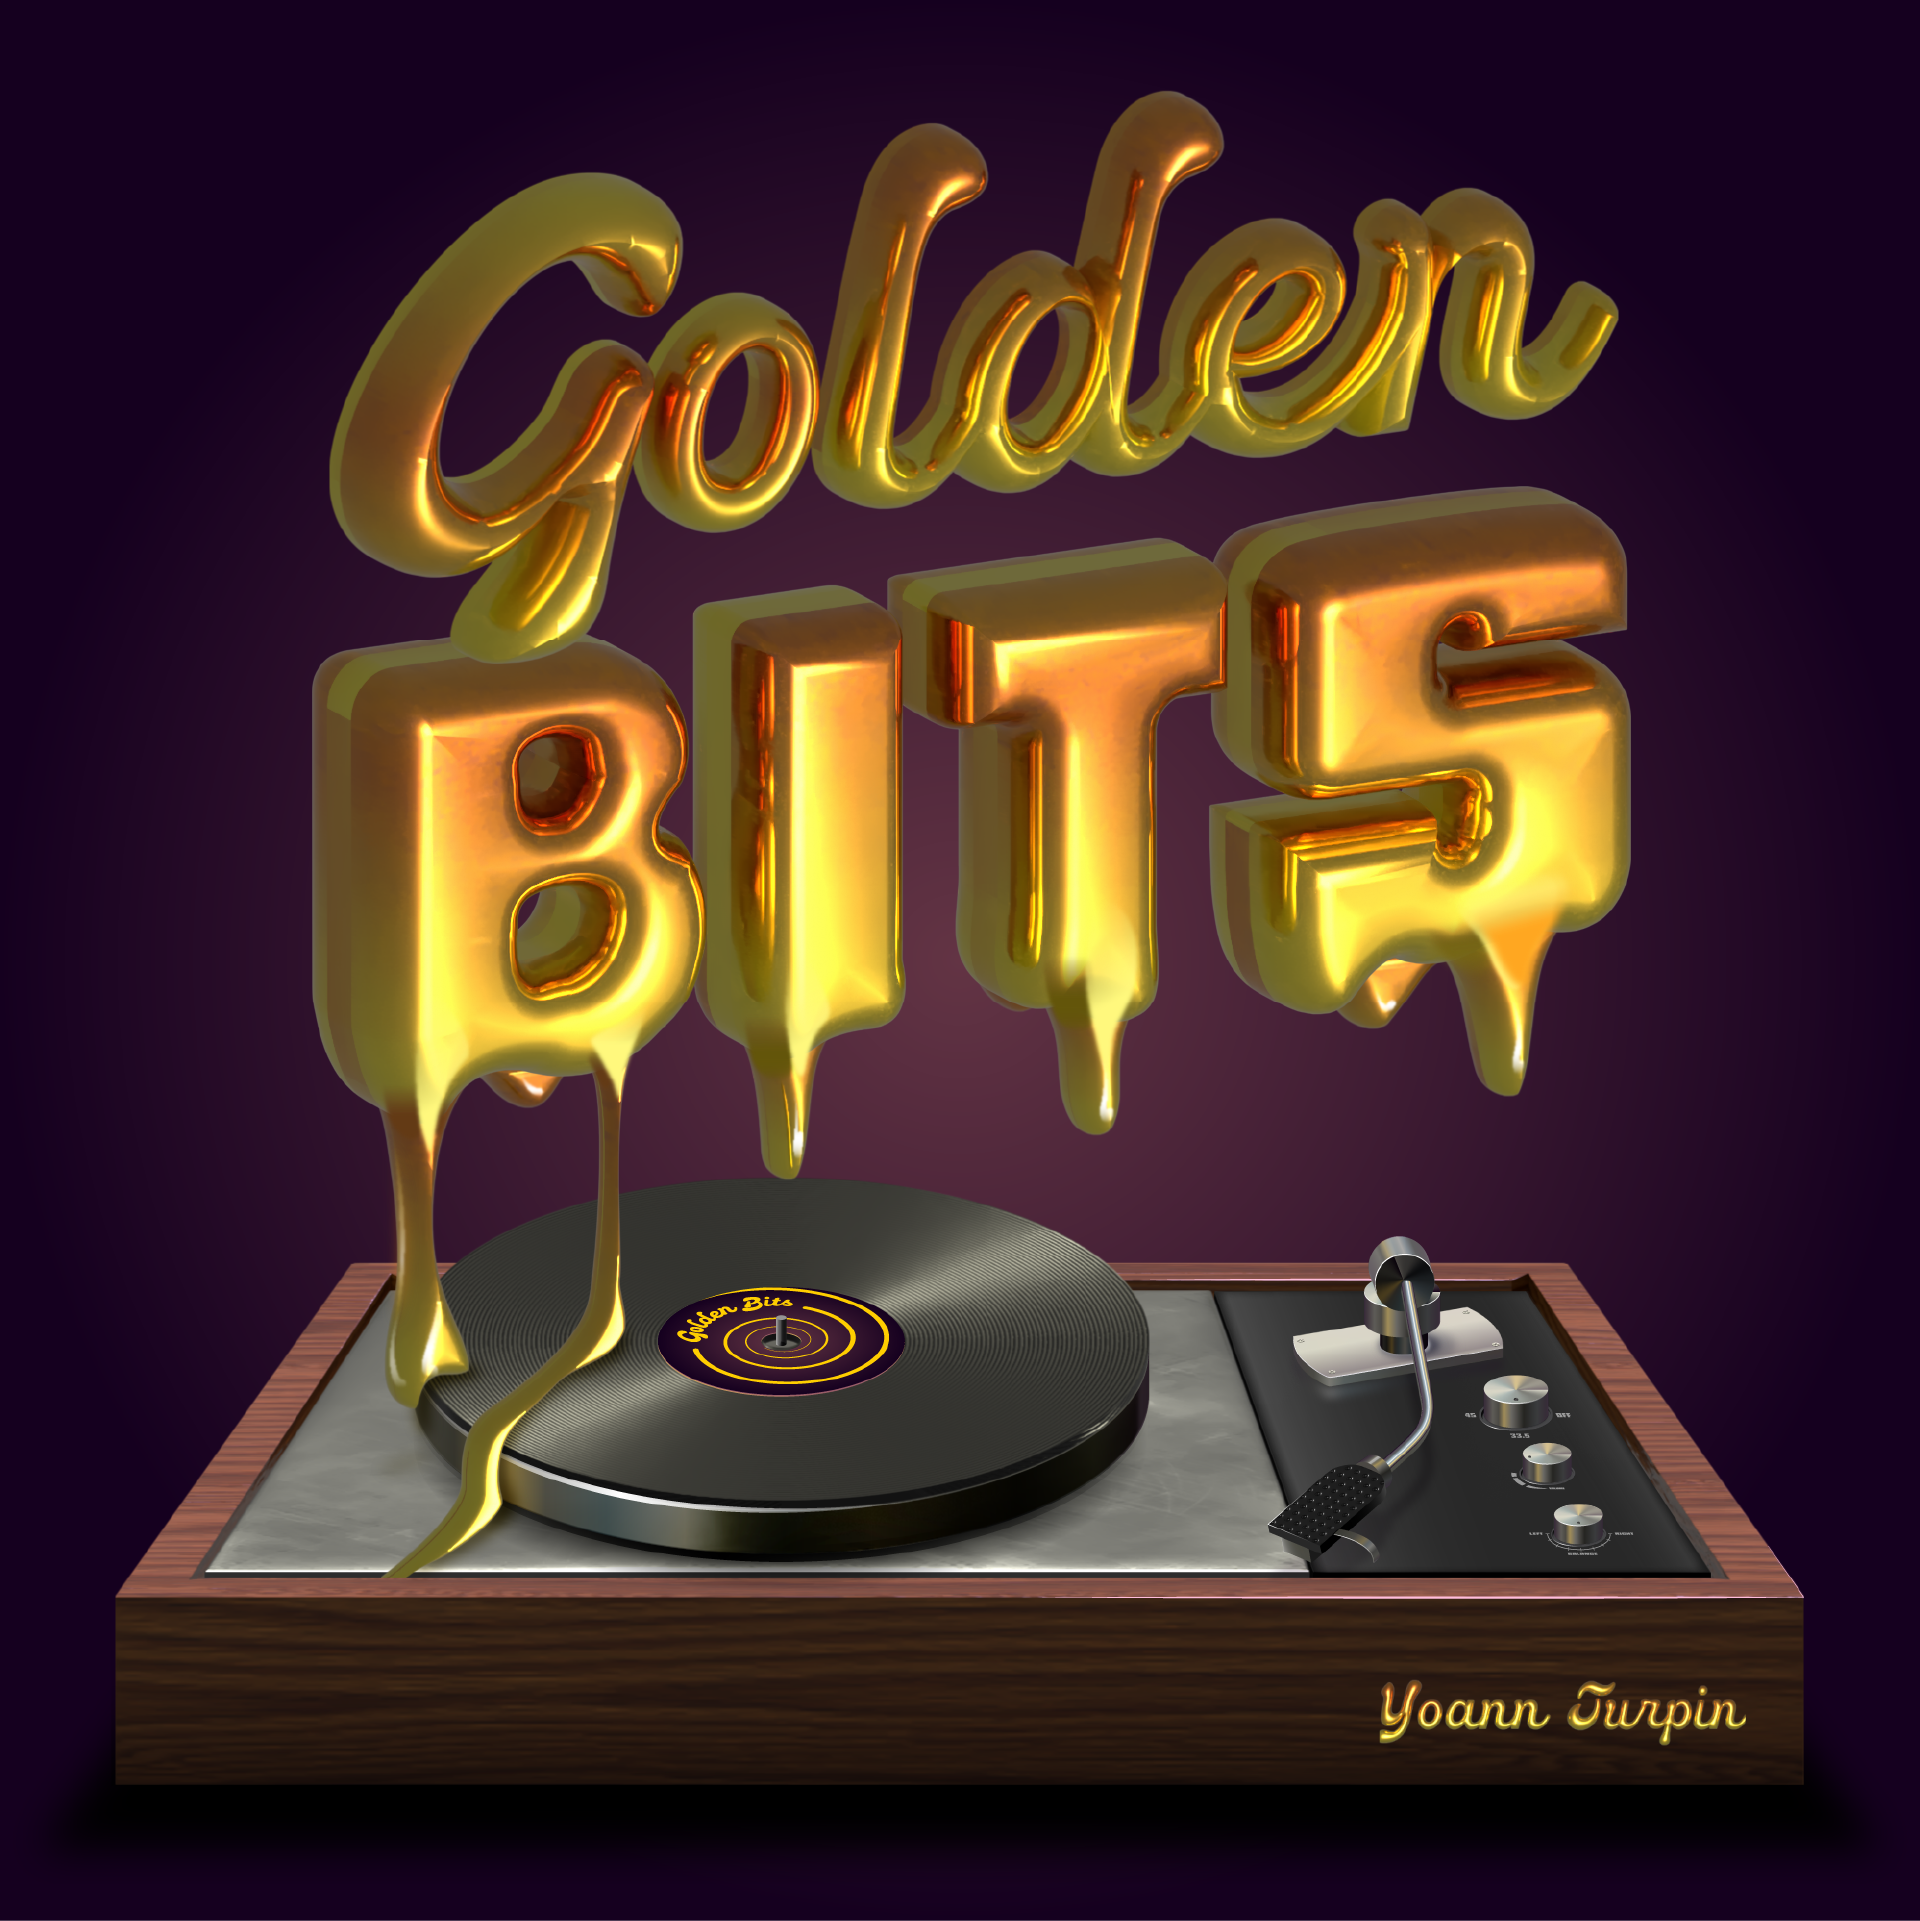 Golden Bits album cover featuring the words in shiny 3D dripping gold over a record player